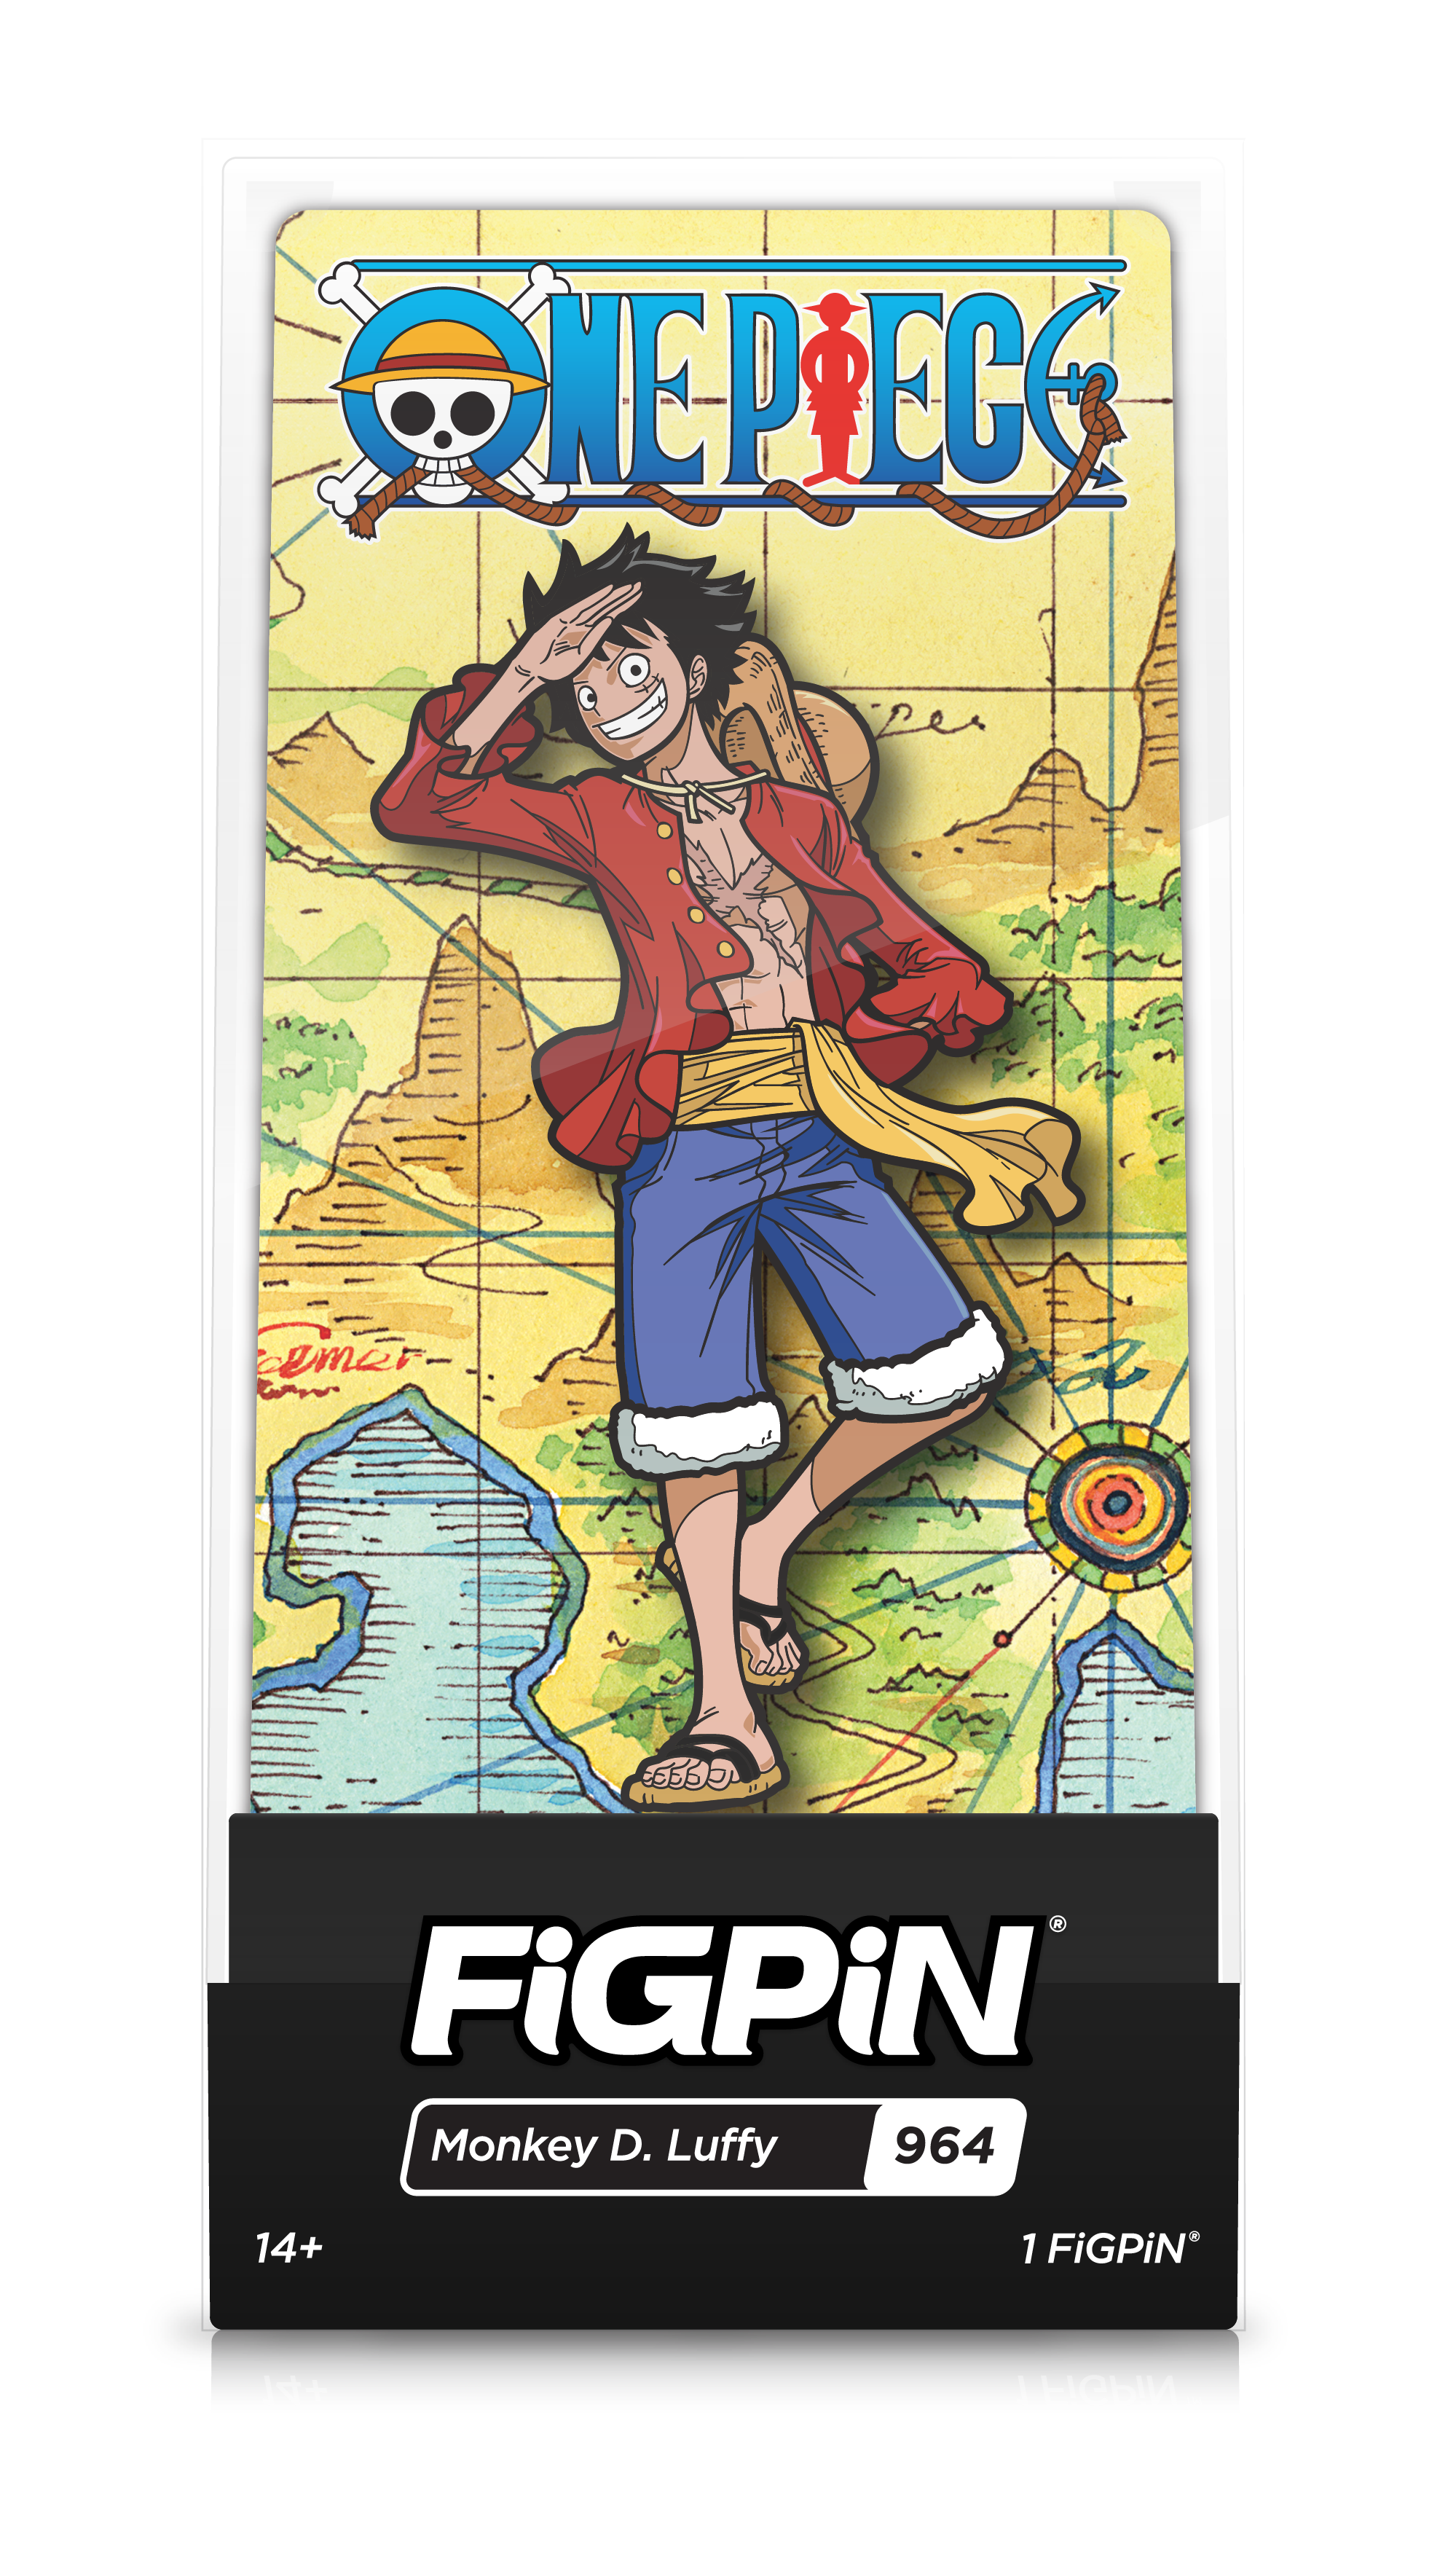 New Character One Piece Monkey D. Luffy Pin By Chica Manga